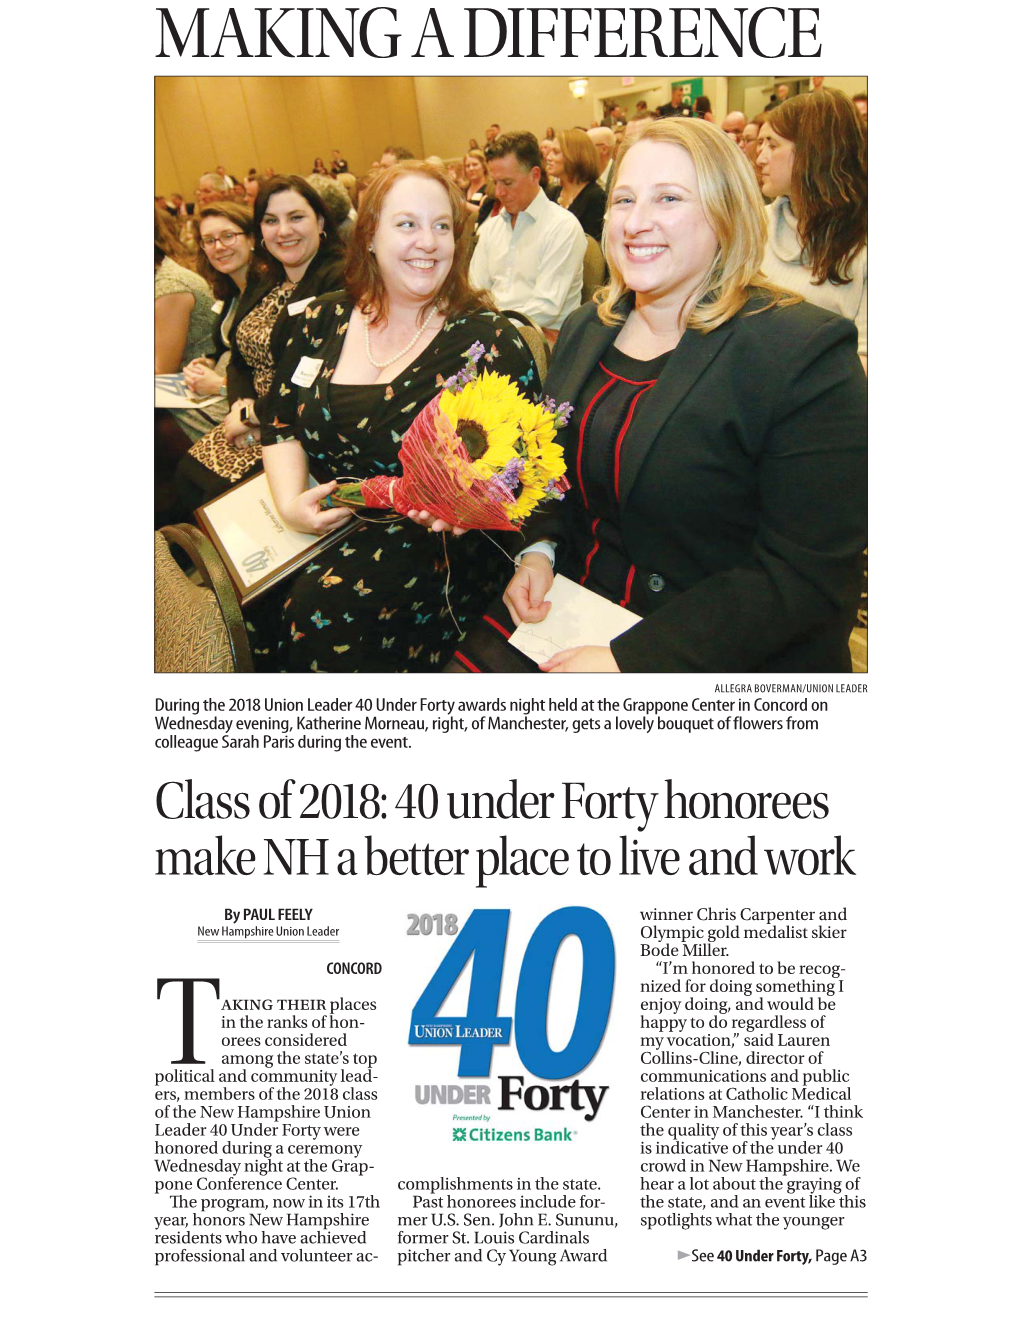 NH Union Leader Class of 2018 40 Under Forty Honorees